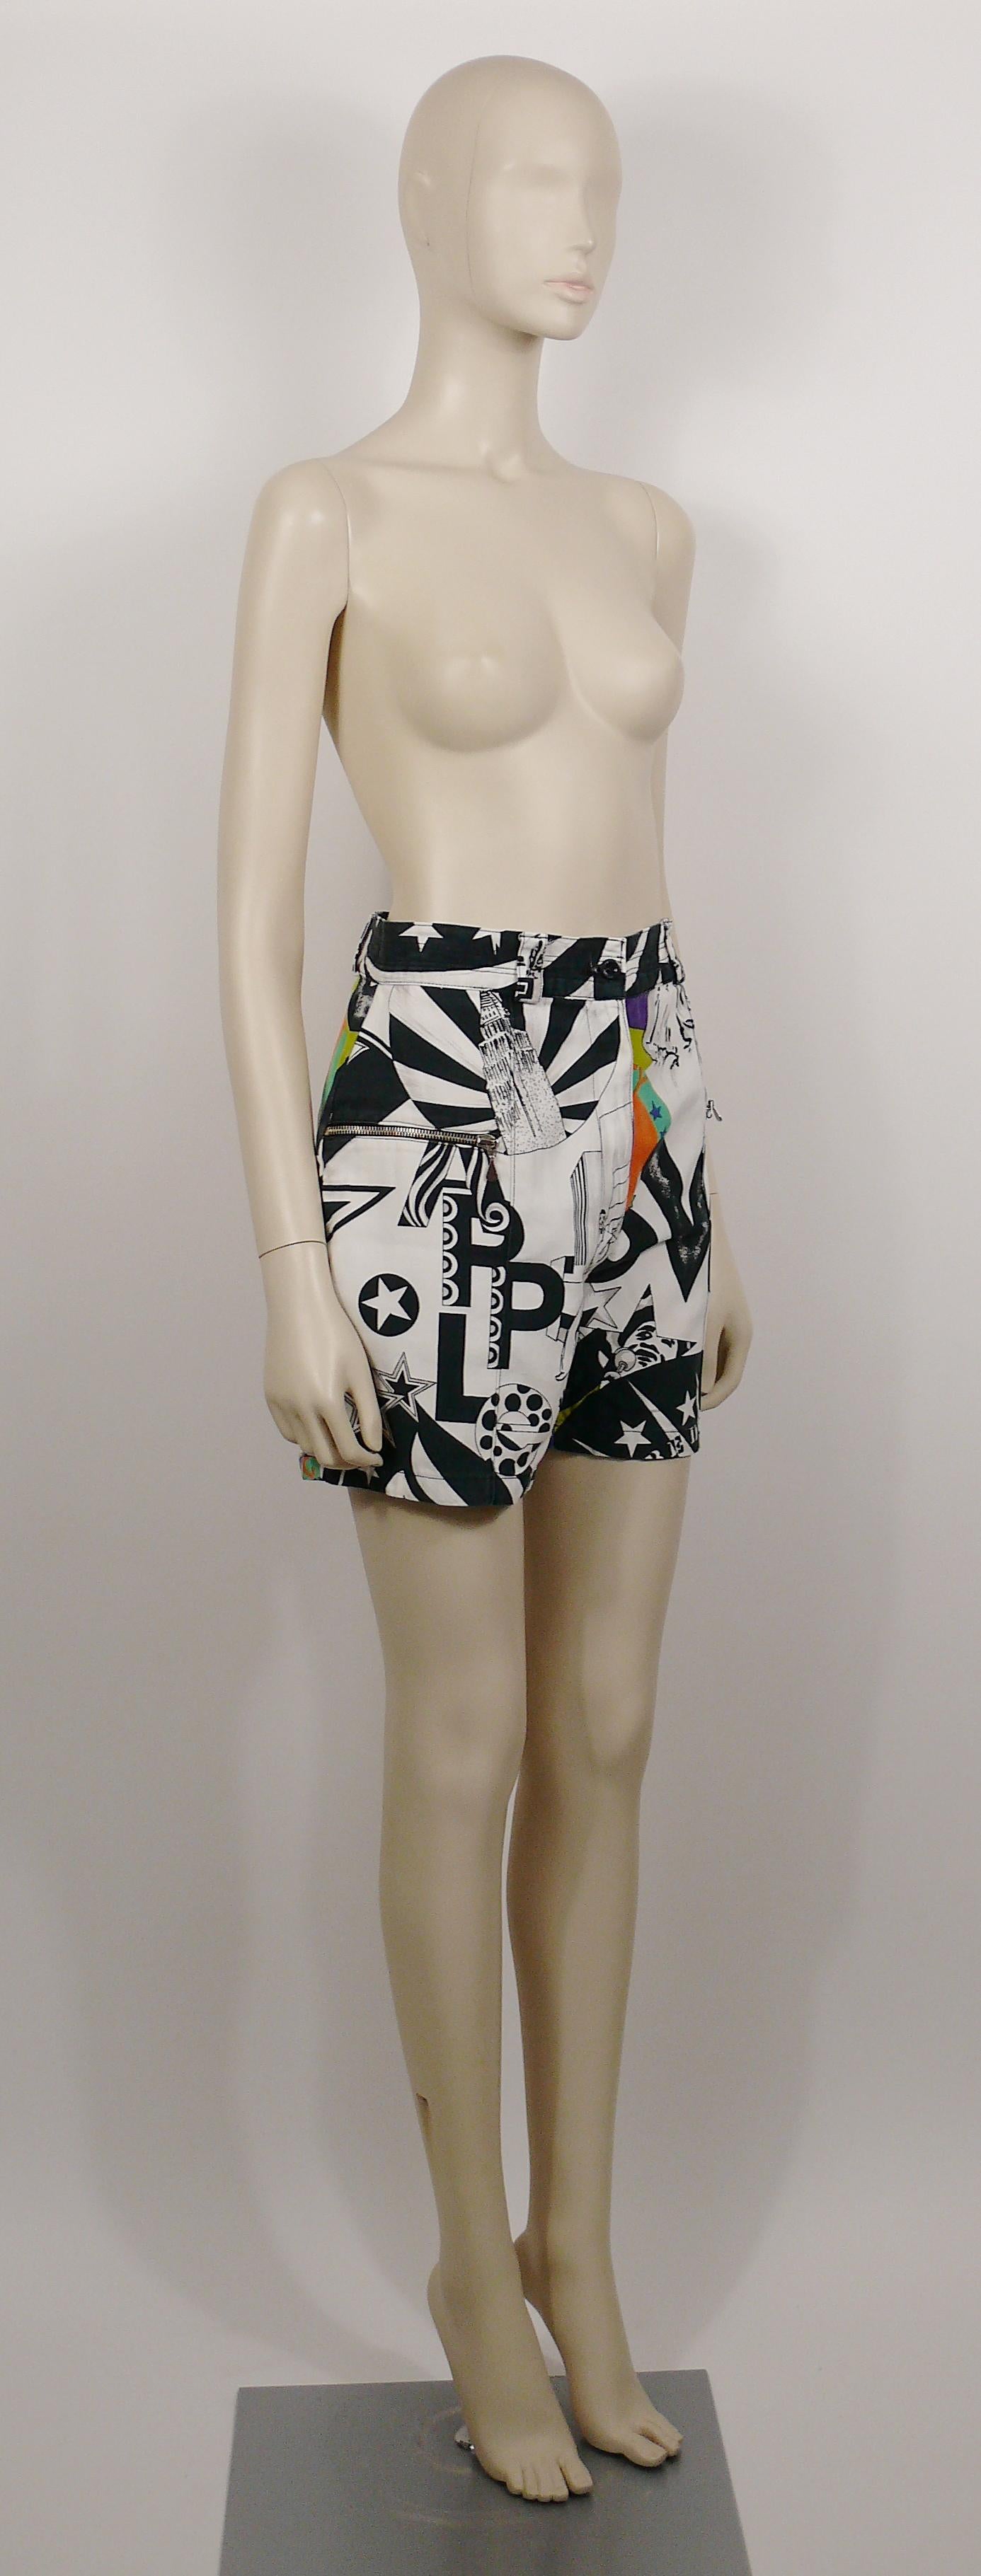 VERSACE JEANS COUTURE vintage Manhattan New York City graffiti prints shorts.

These shorts feature :
- Black, white and grey prints on front.
- Colourful prints on back.
- Button and zipper closure at the front.
- Belt loops, 2 front zippered